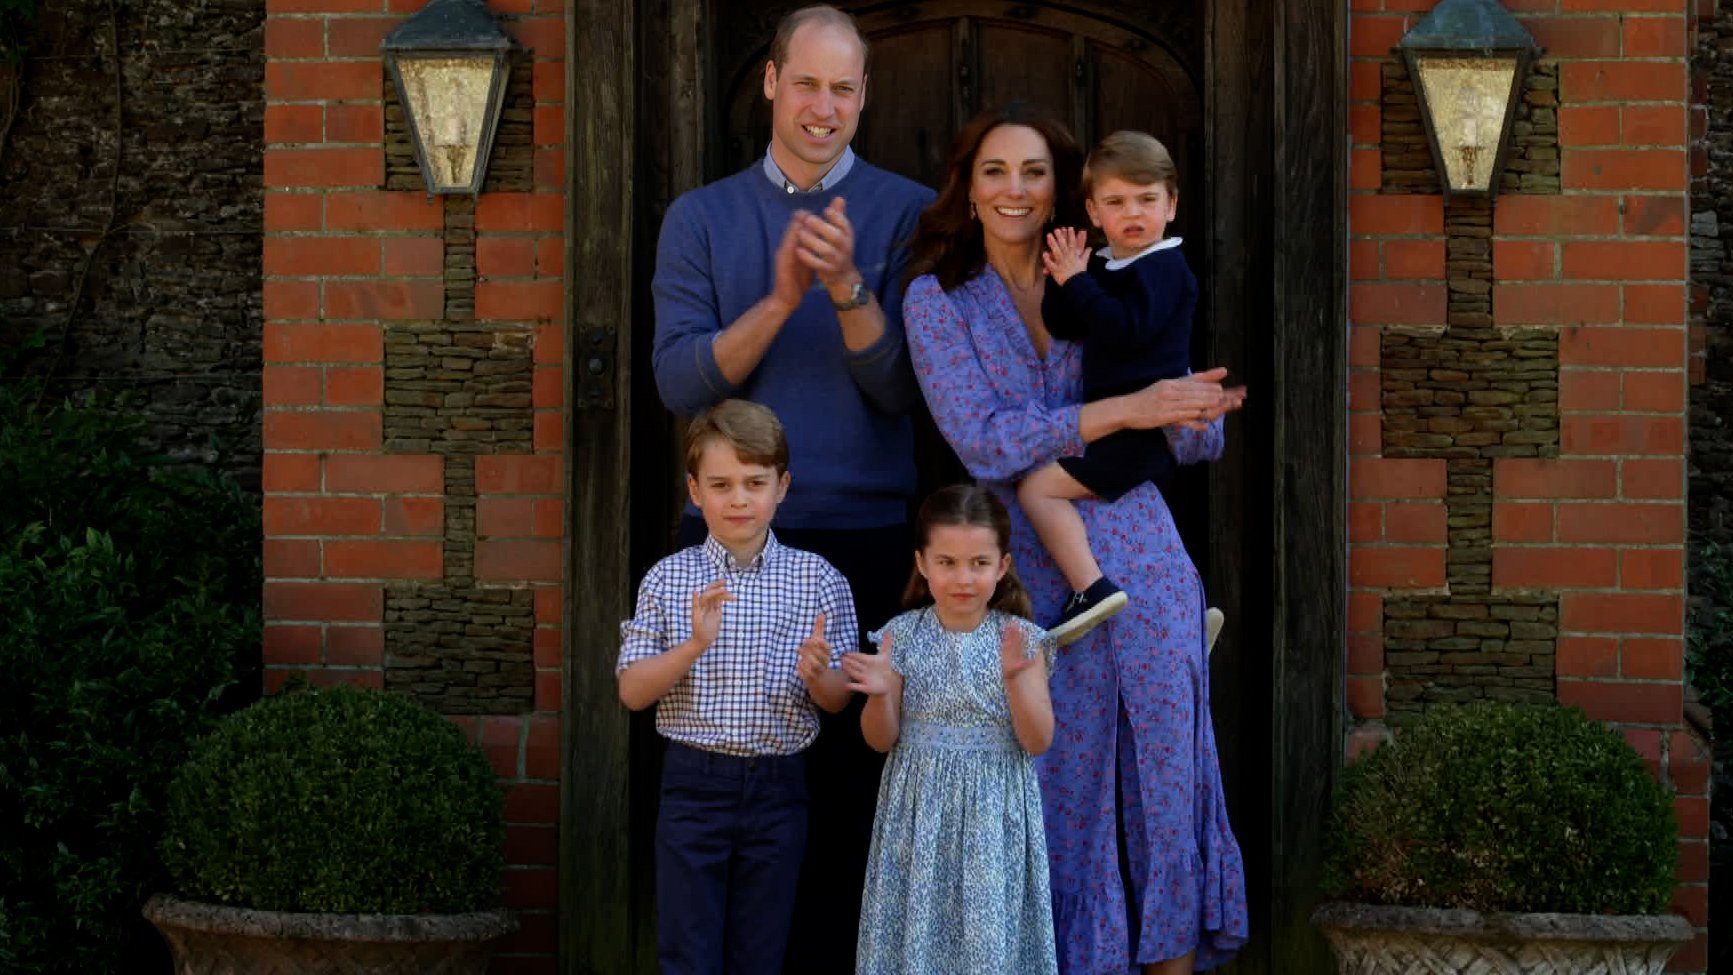 Prince William, Catherine Duchess of Cambridge, Prince George, Princess Charlotte and Prince Louis at London on April 23, 2020 in London, England. | Source: Getty Images